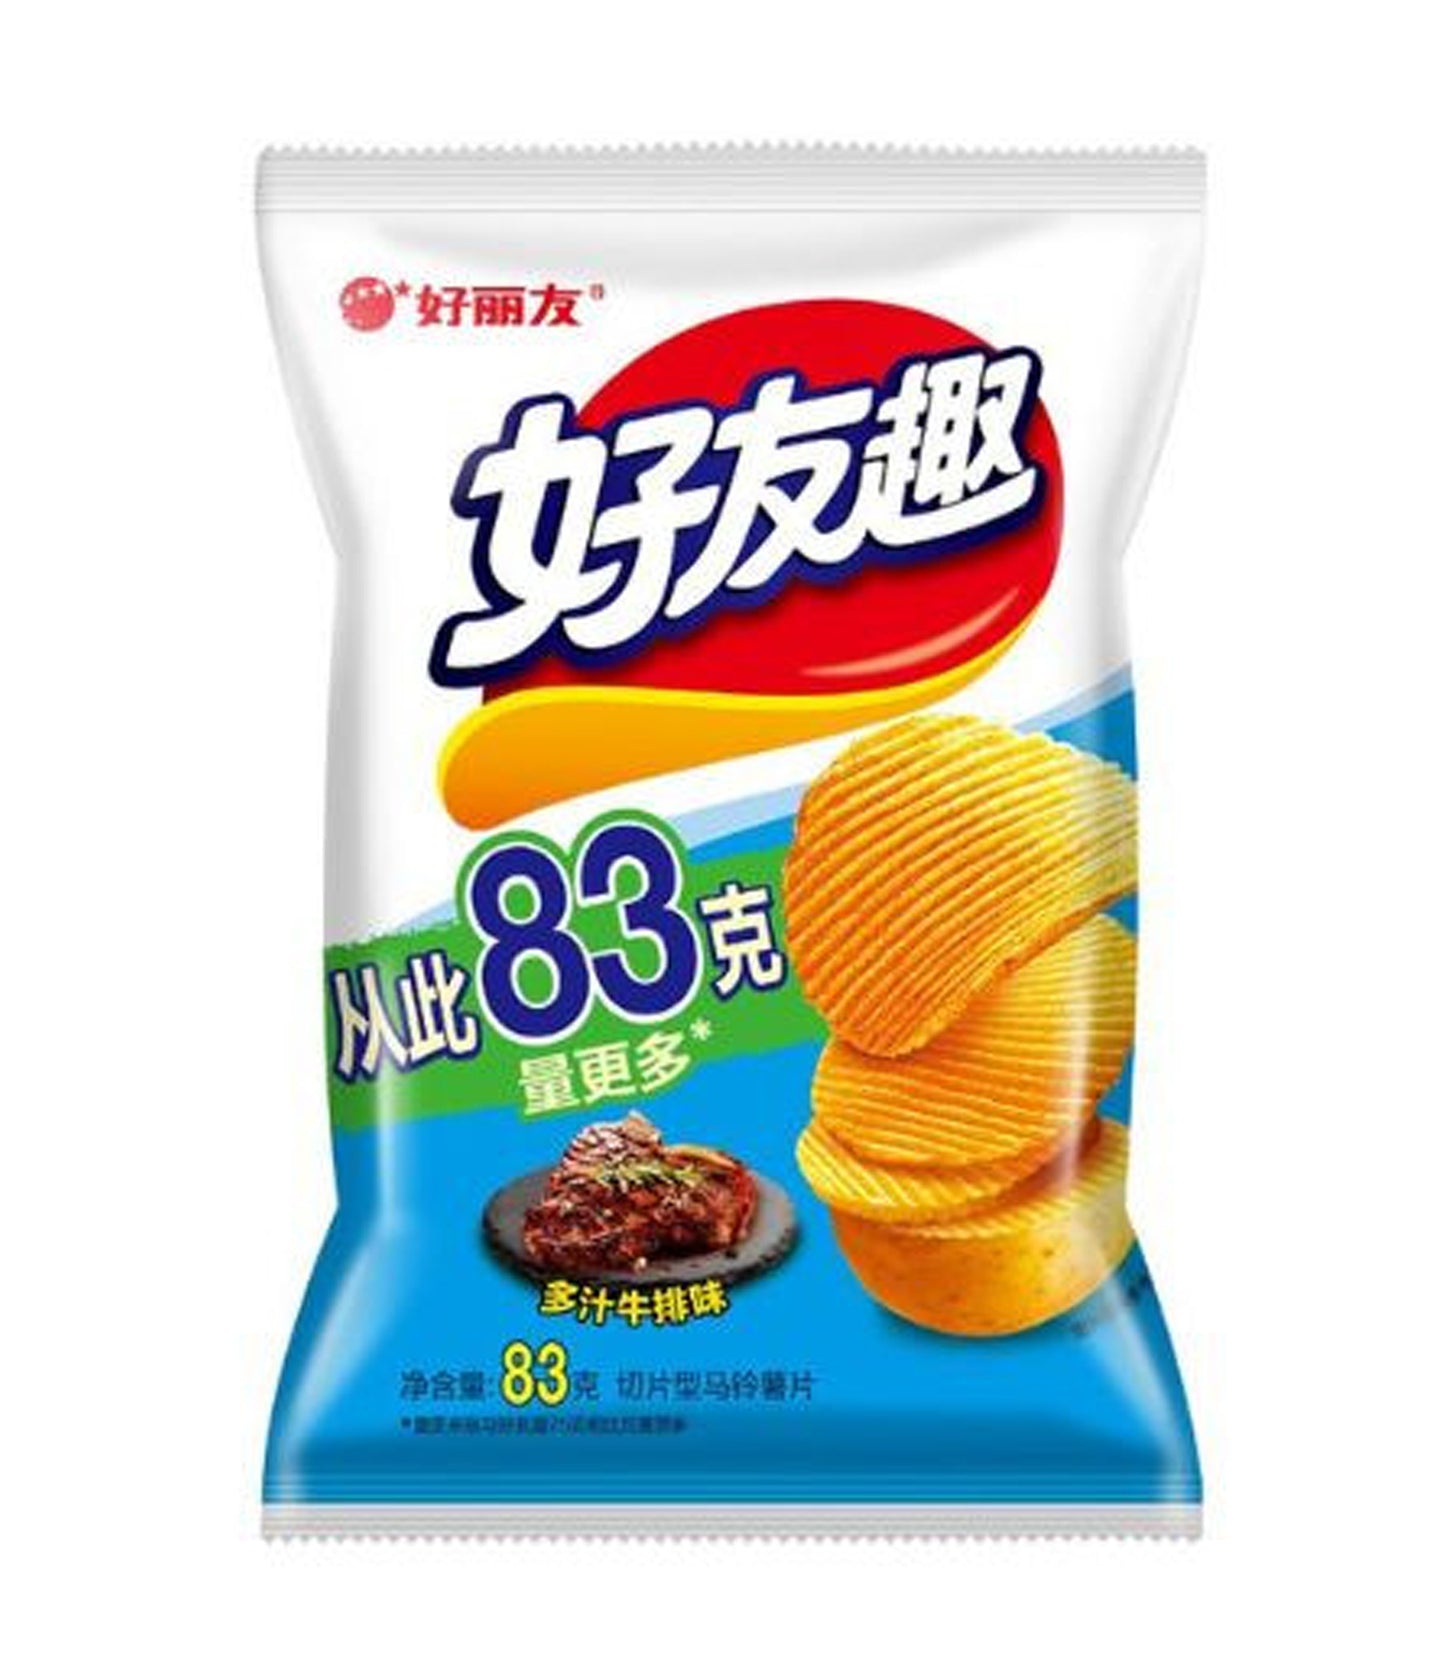 Orion – Potato Chips (Beef Flavor) 83g